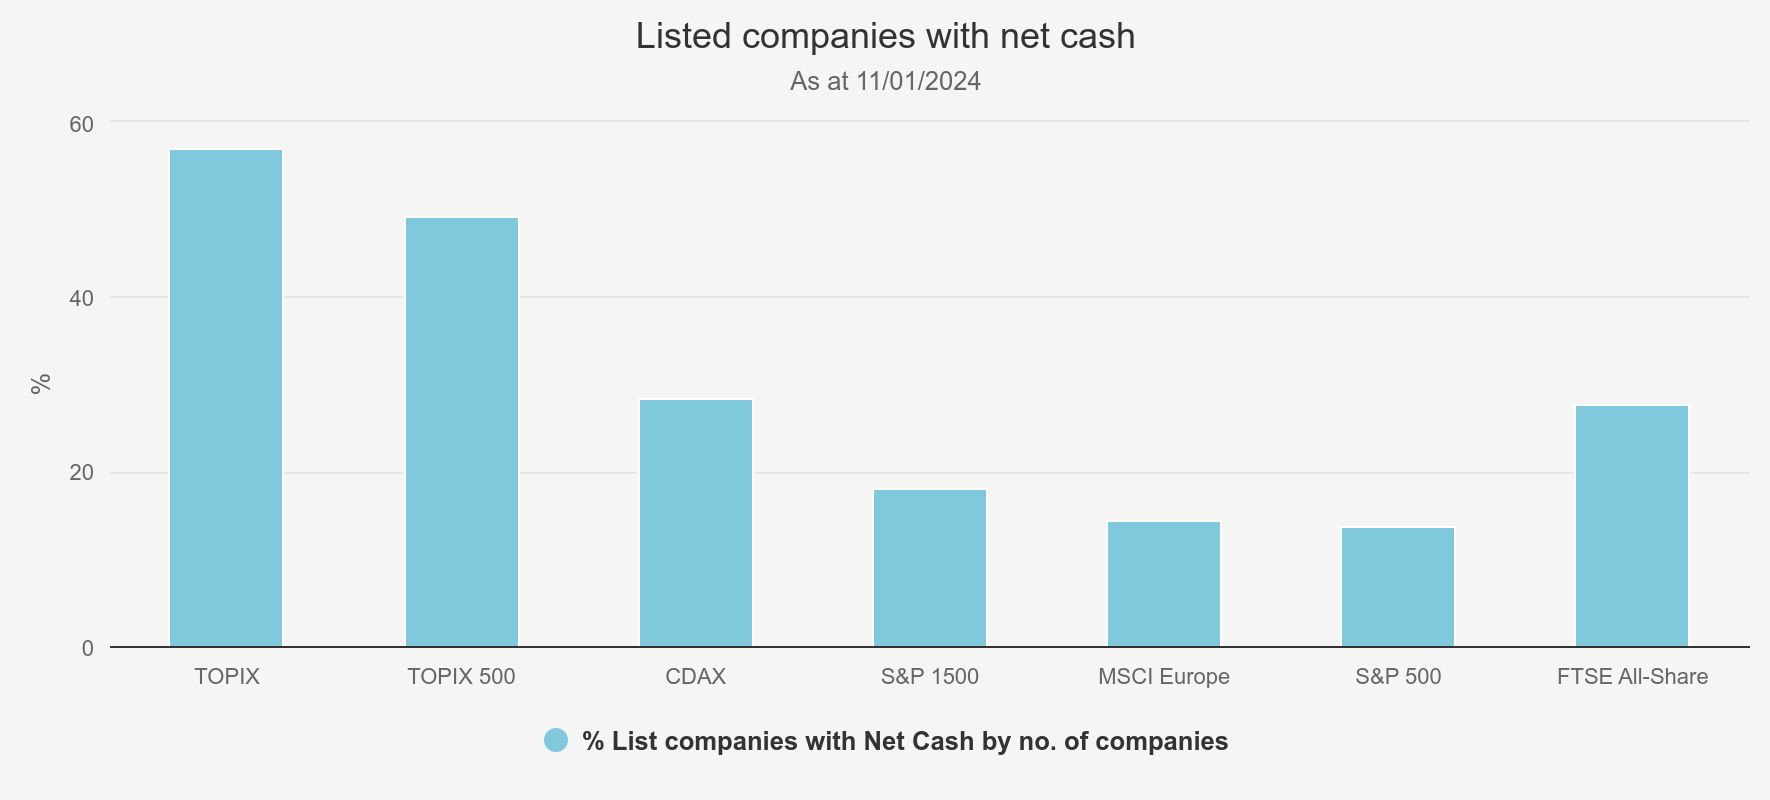 Kepler Listed companies with net cash